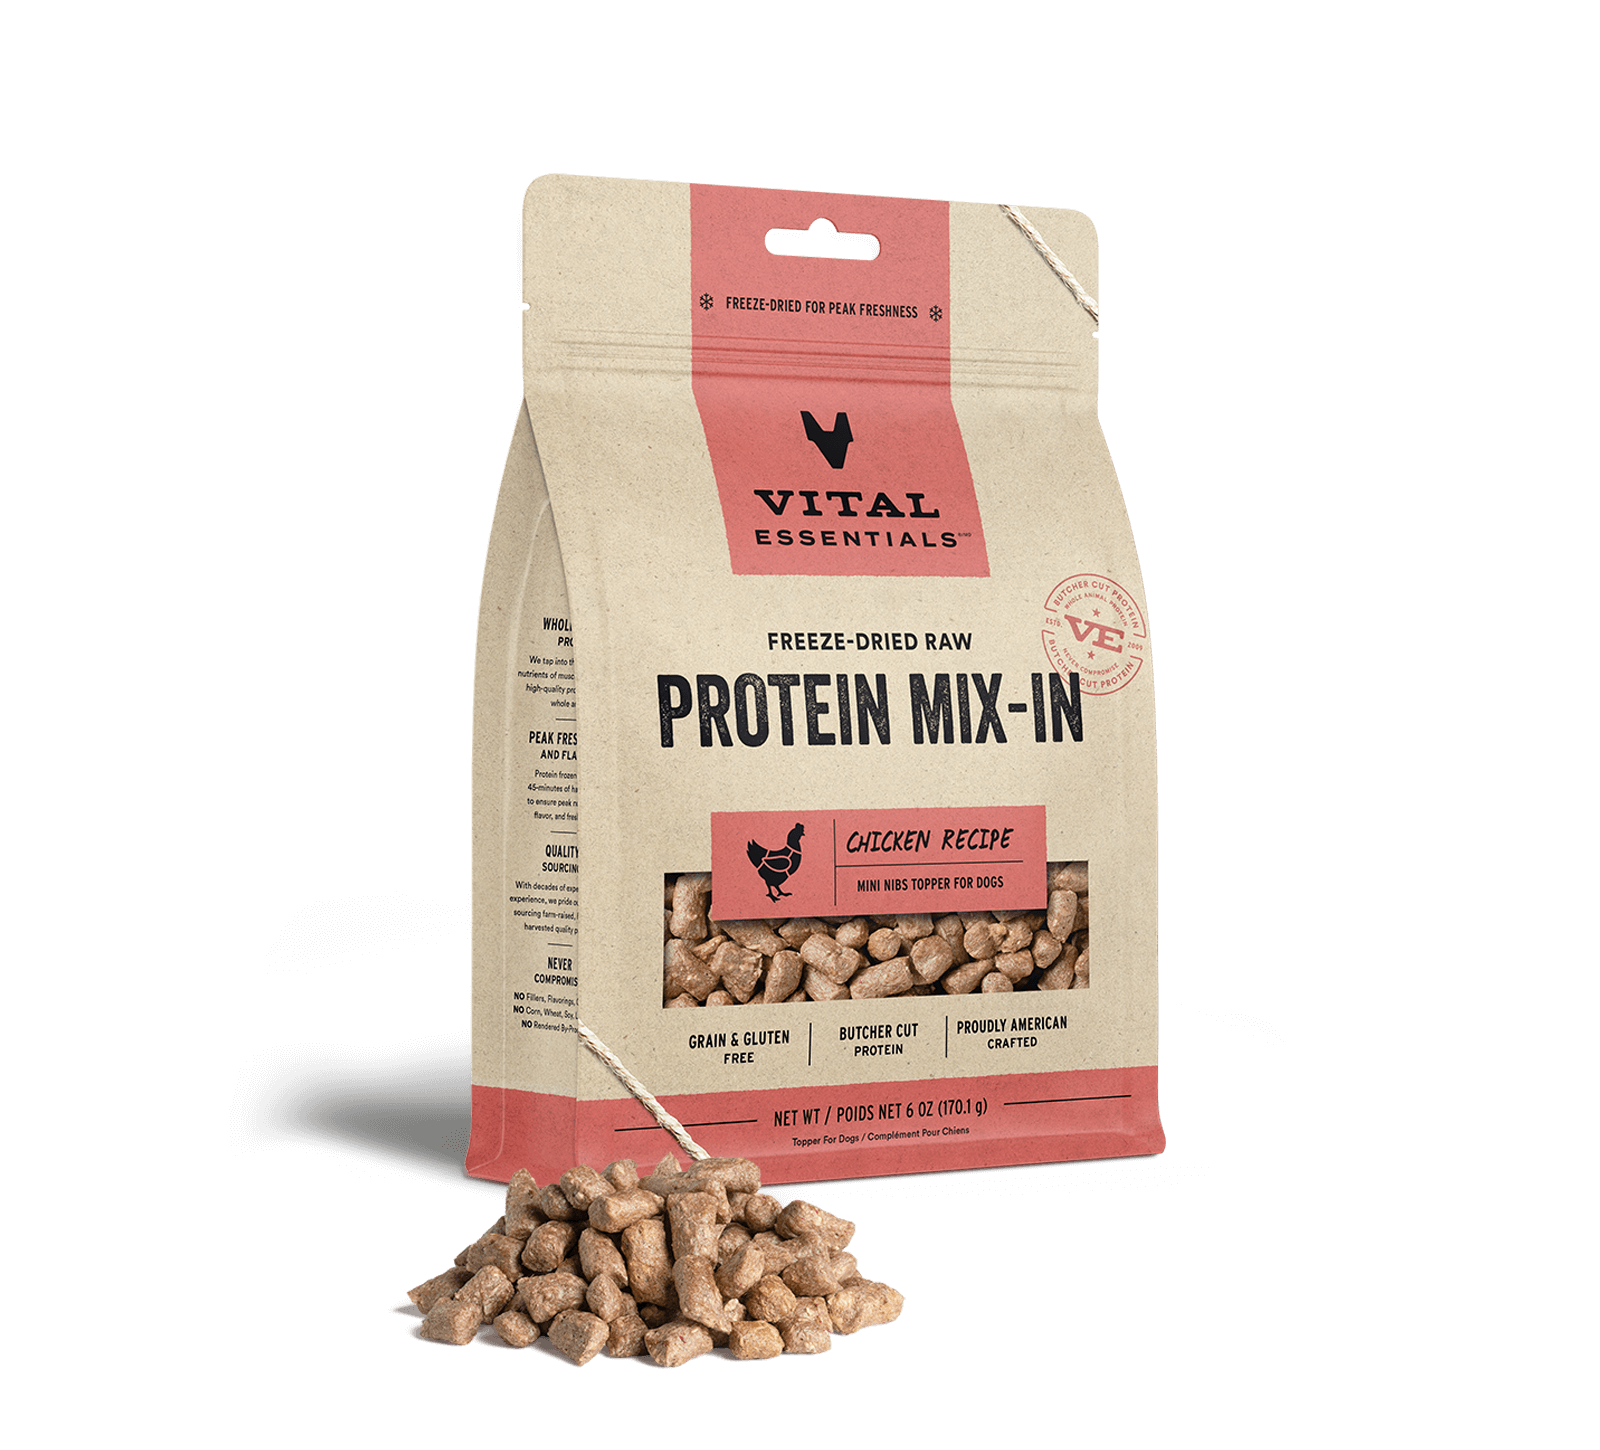 Vital Essentials Freeze-Dried Raw Protein Mix-In Chicken Recipe Mini Nibs Topper for Dogs, 6 oz - Health/First Aid